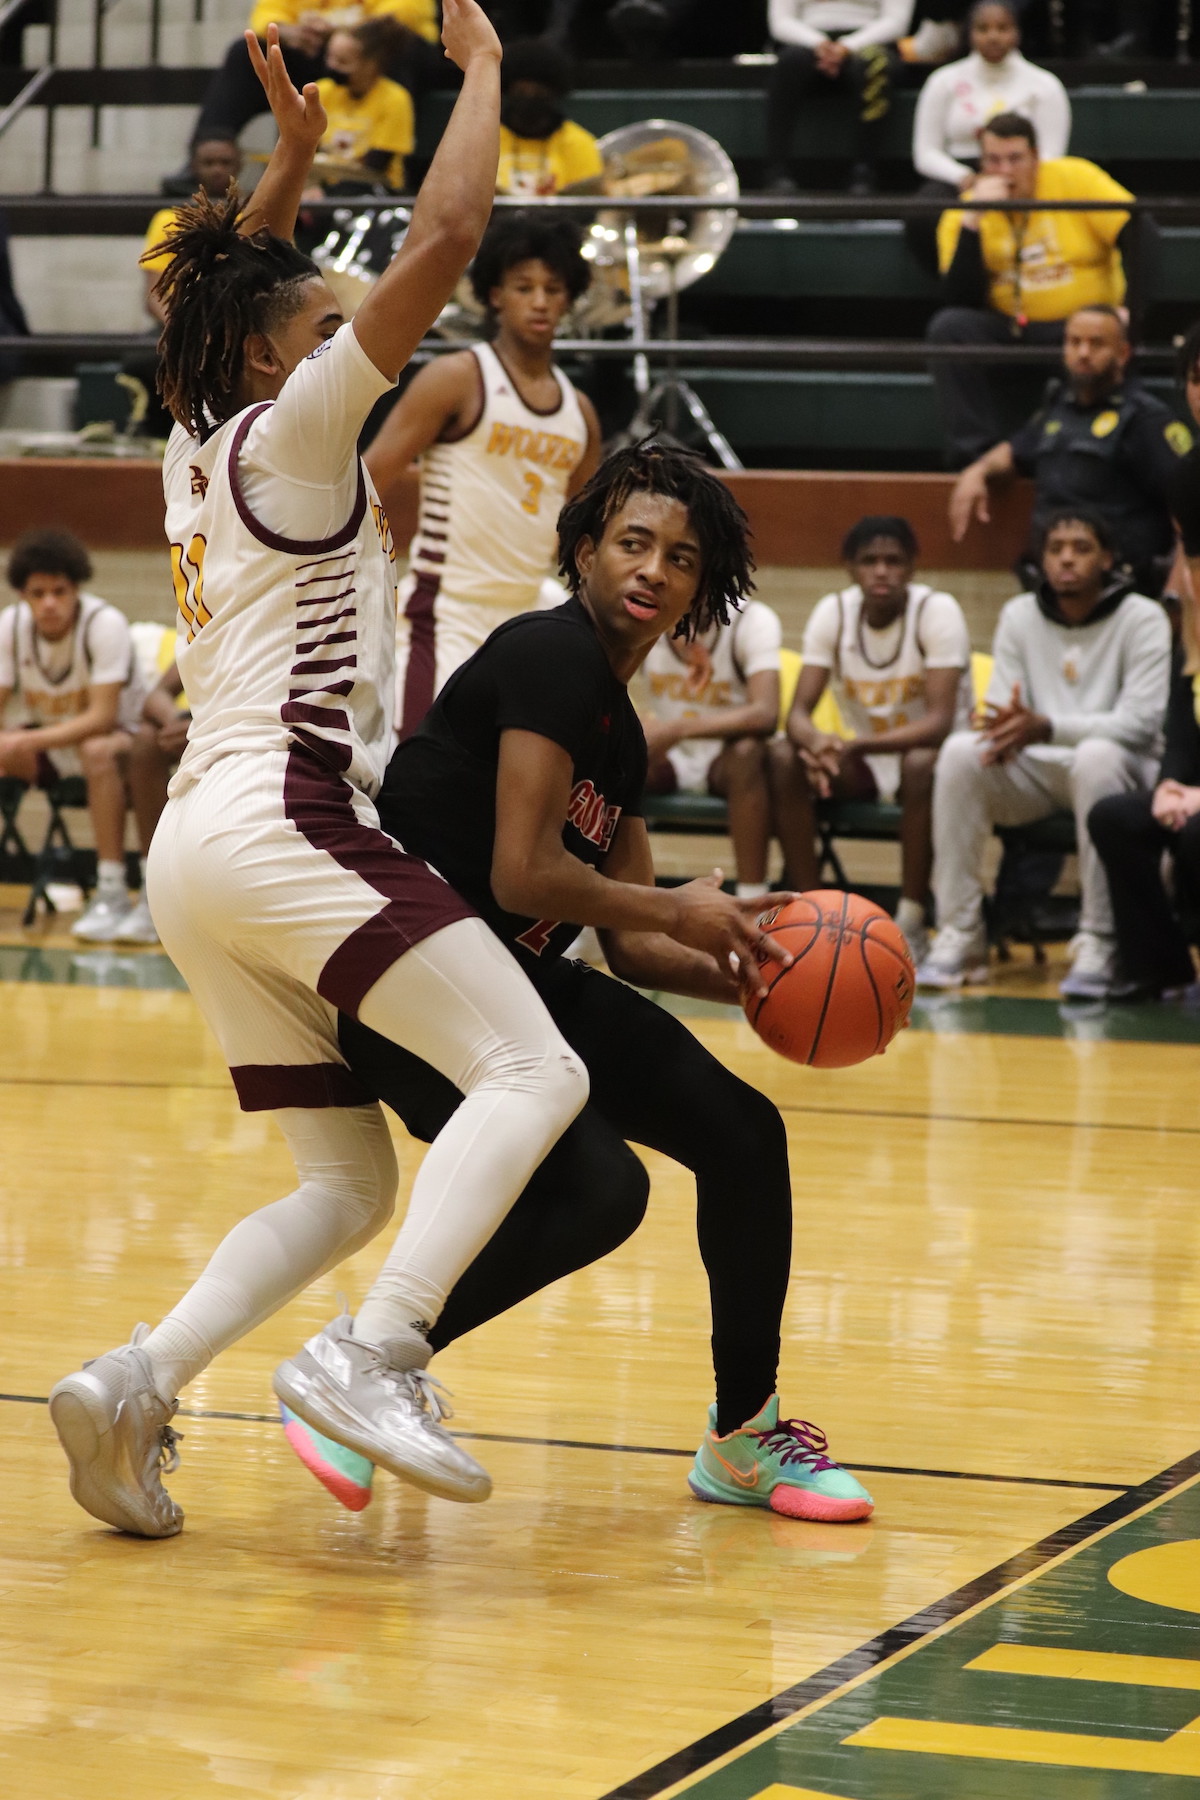 Goose Creek Memorial basketball players tries to get around opponent